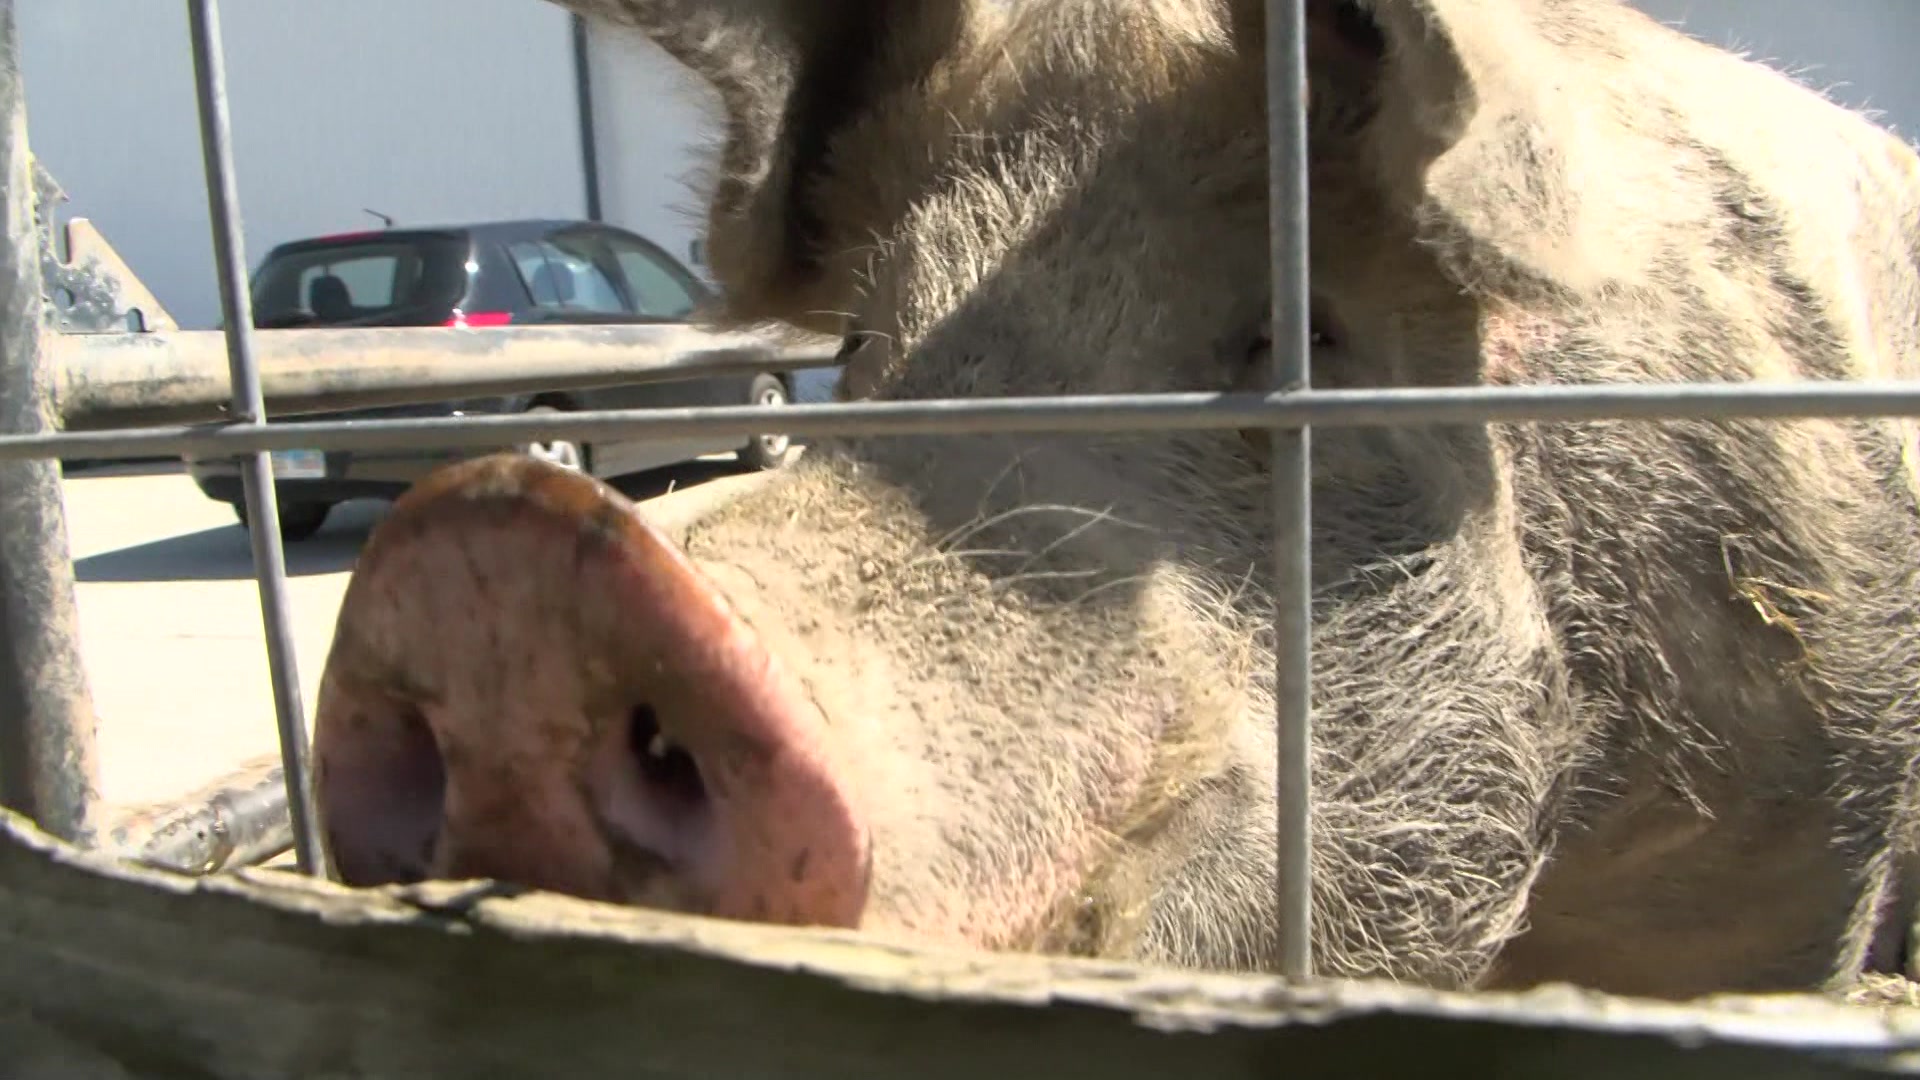 ‘Every year is a milestone’: Tiny Hooves Sanctuary celebrates 9 years of saving animals [Video]